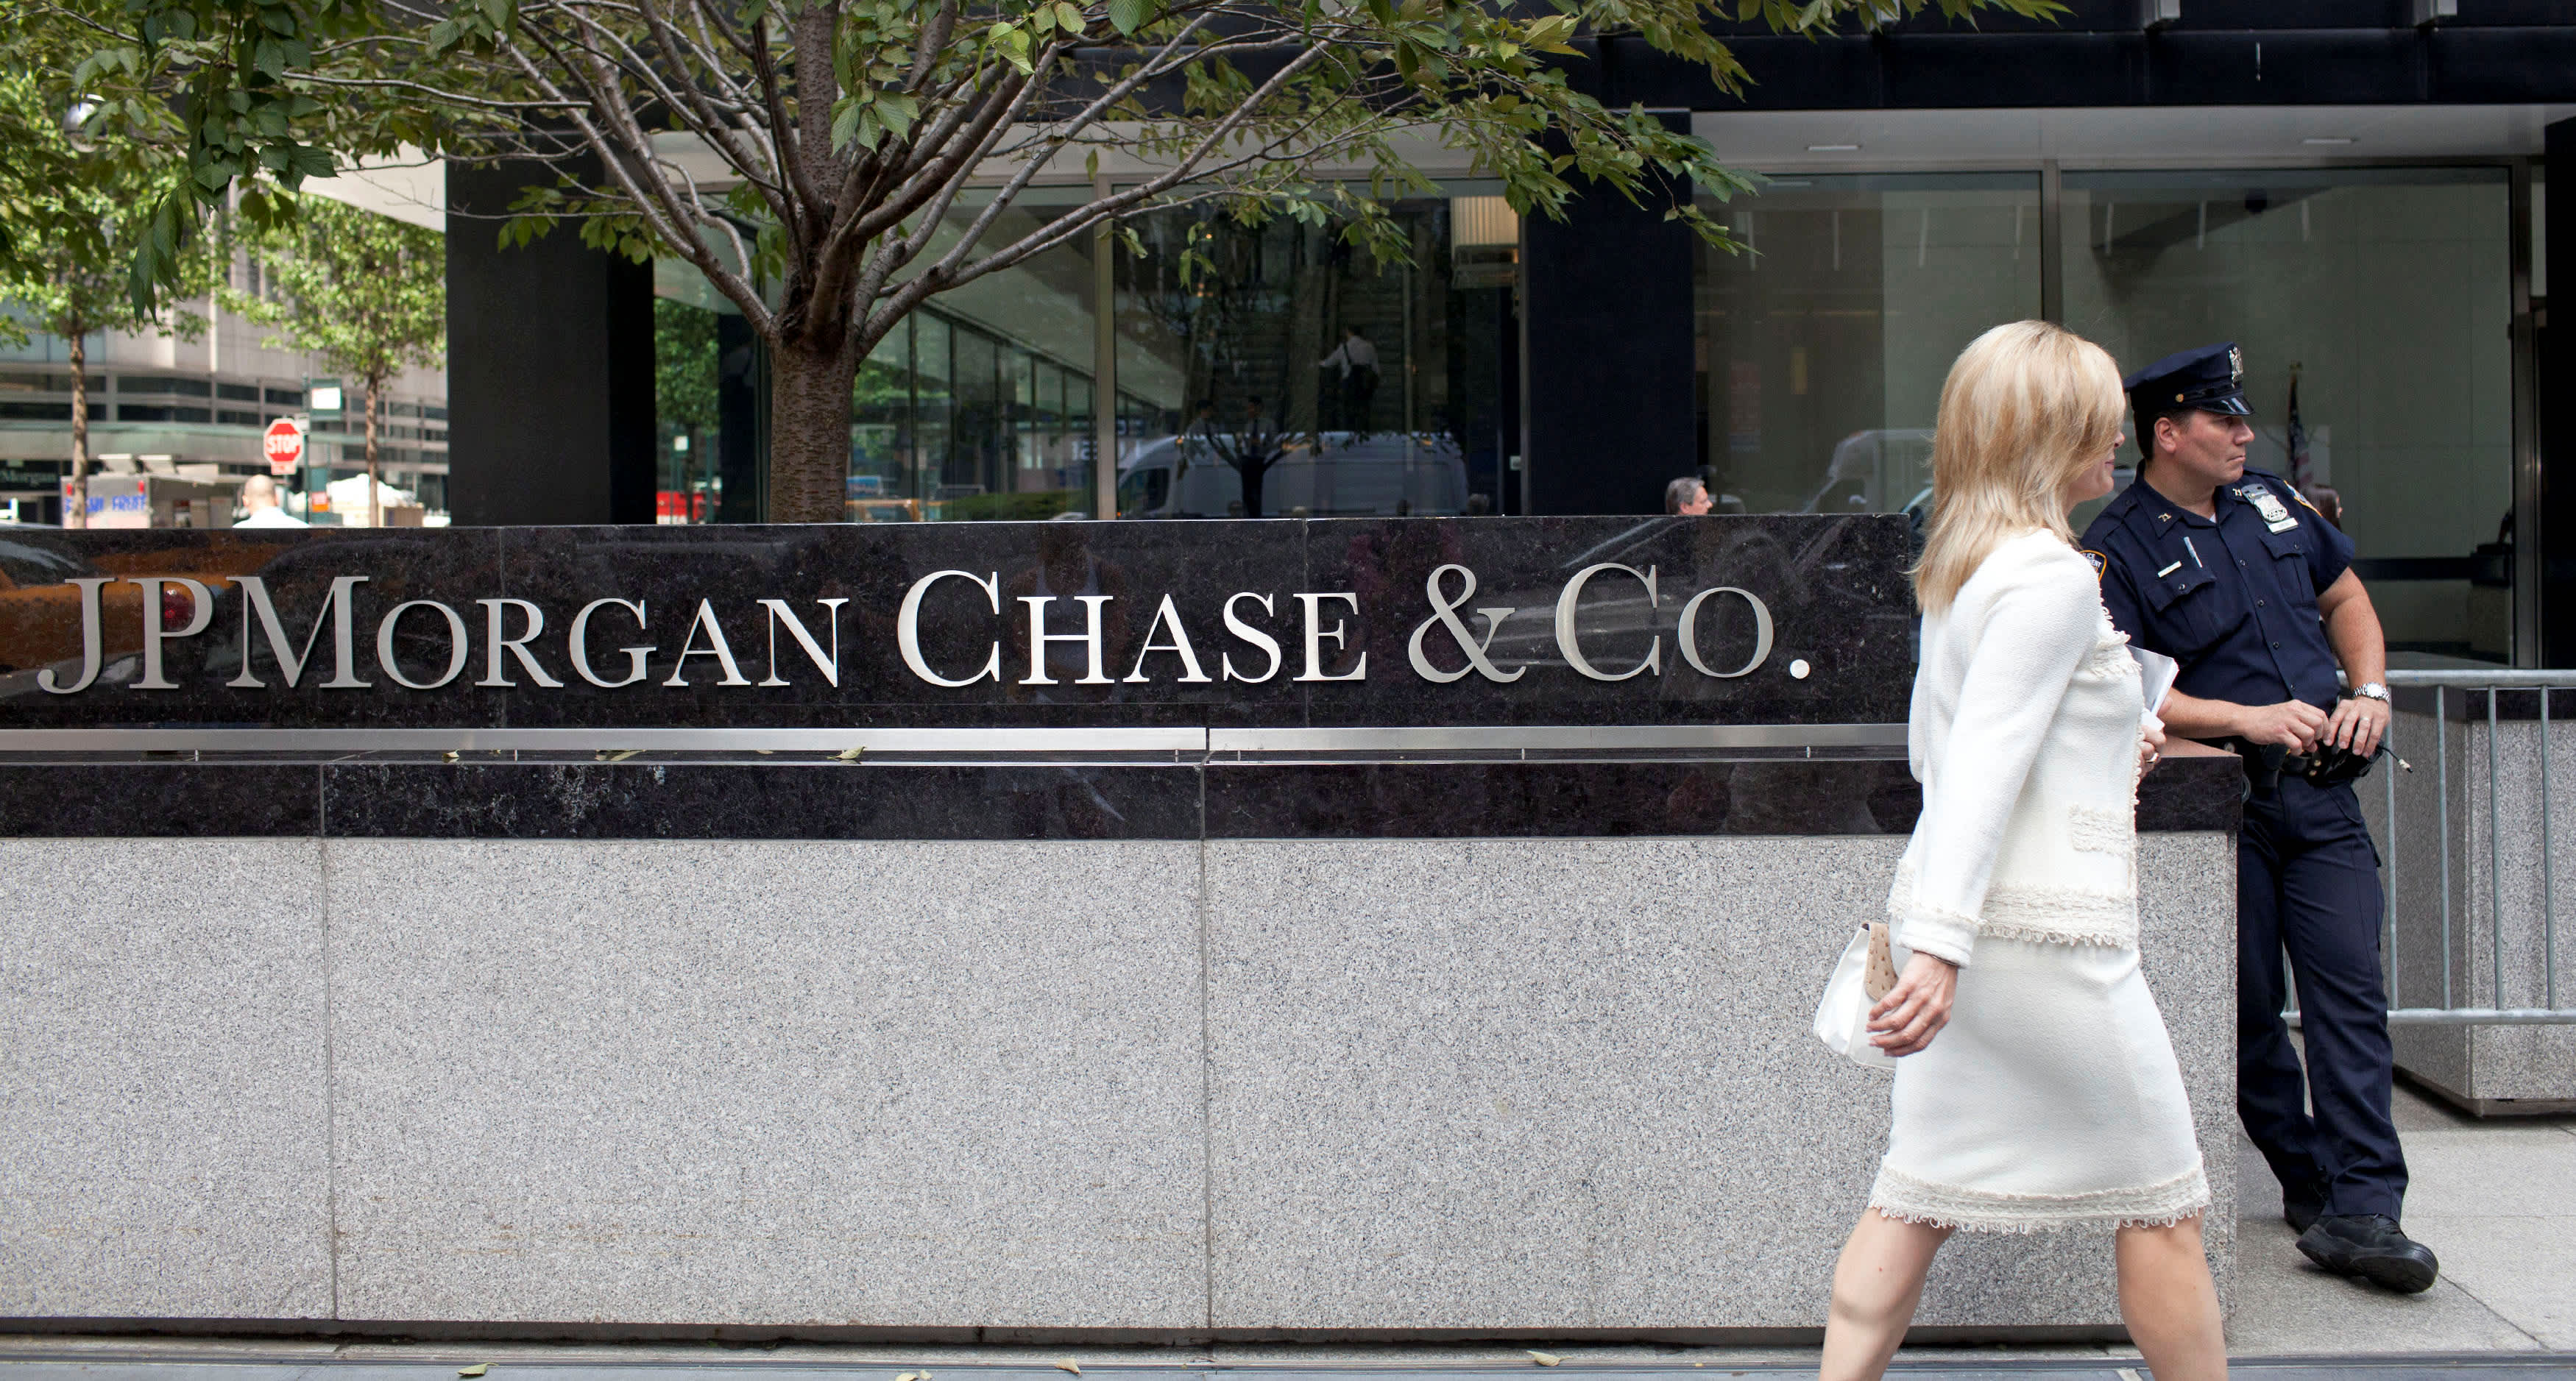 JPMorgan’s new health business makes inaugural investment in start-up Vera Whole Health